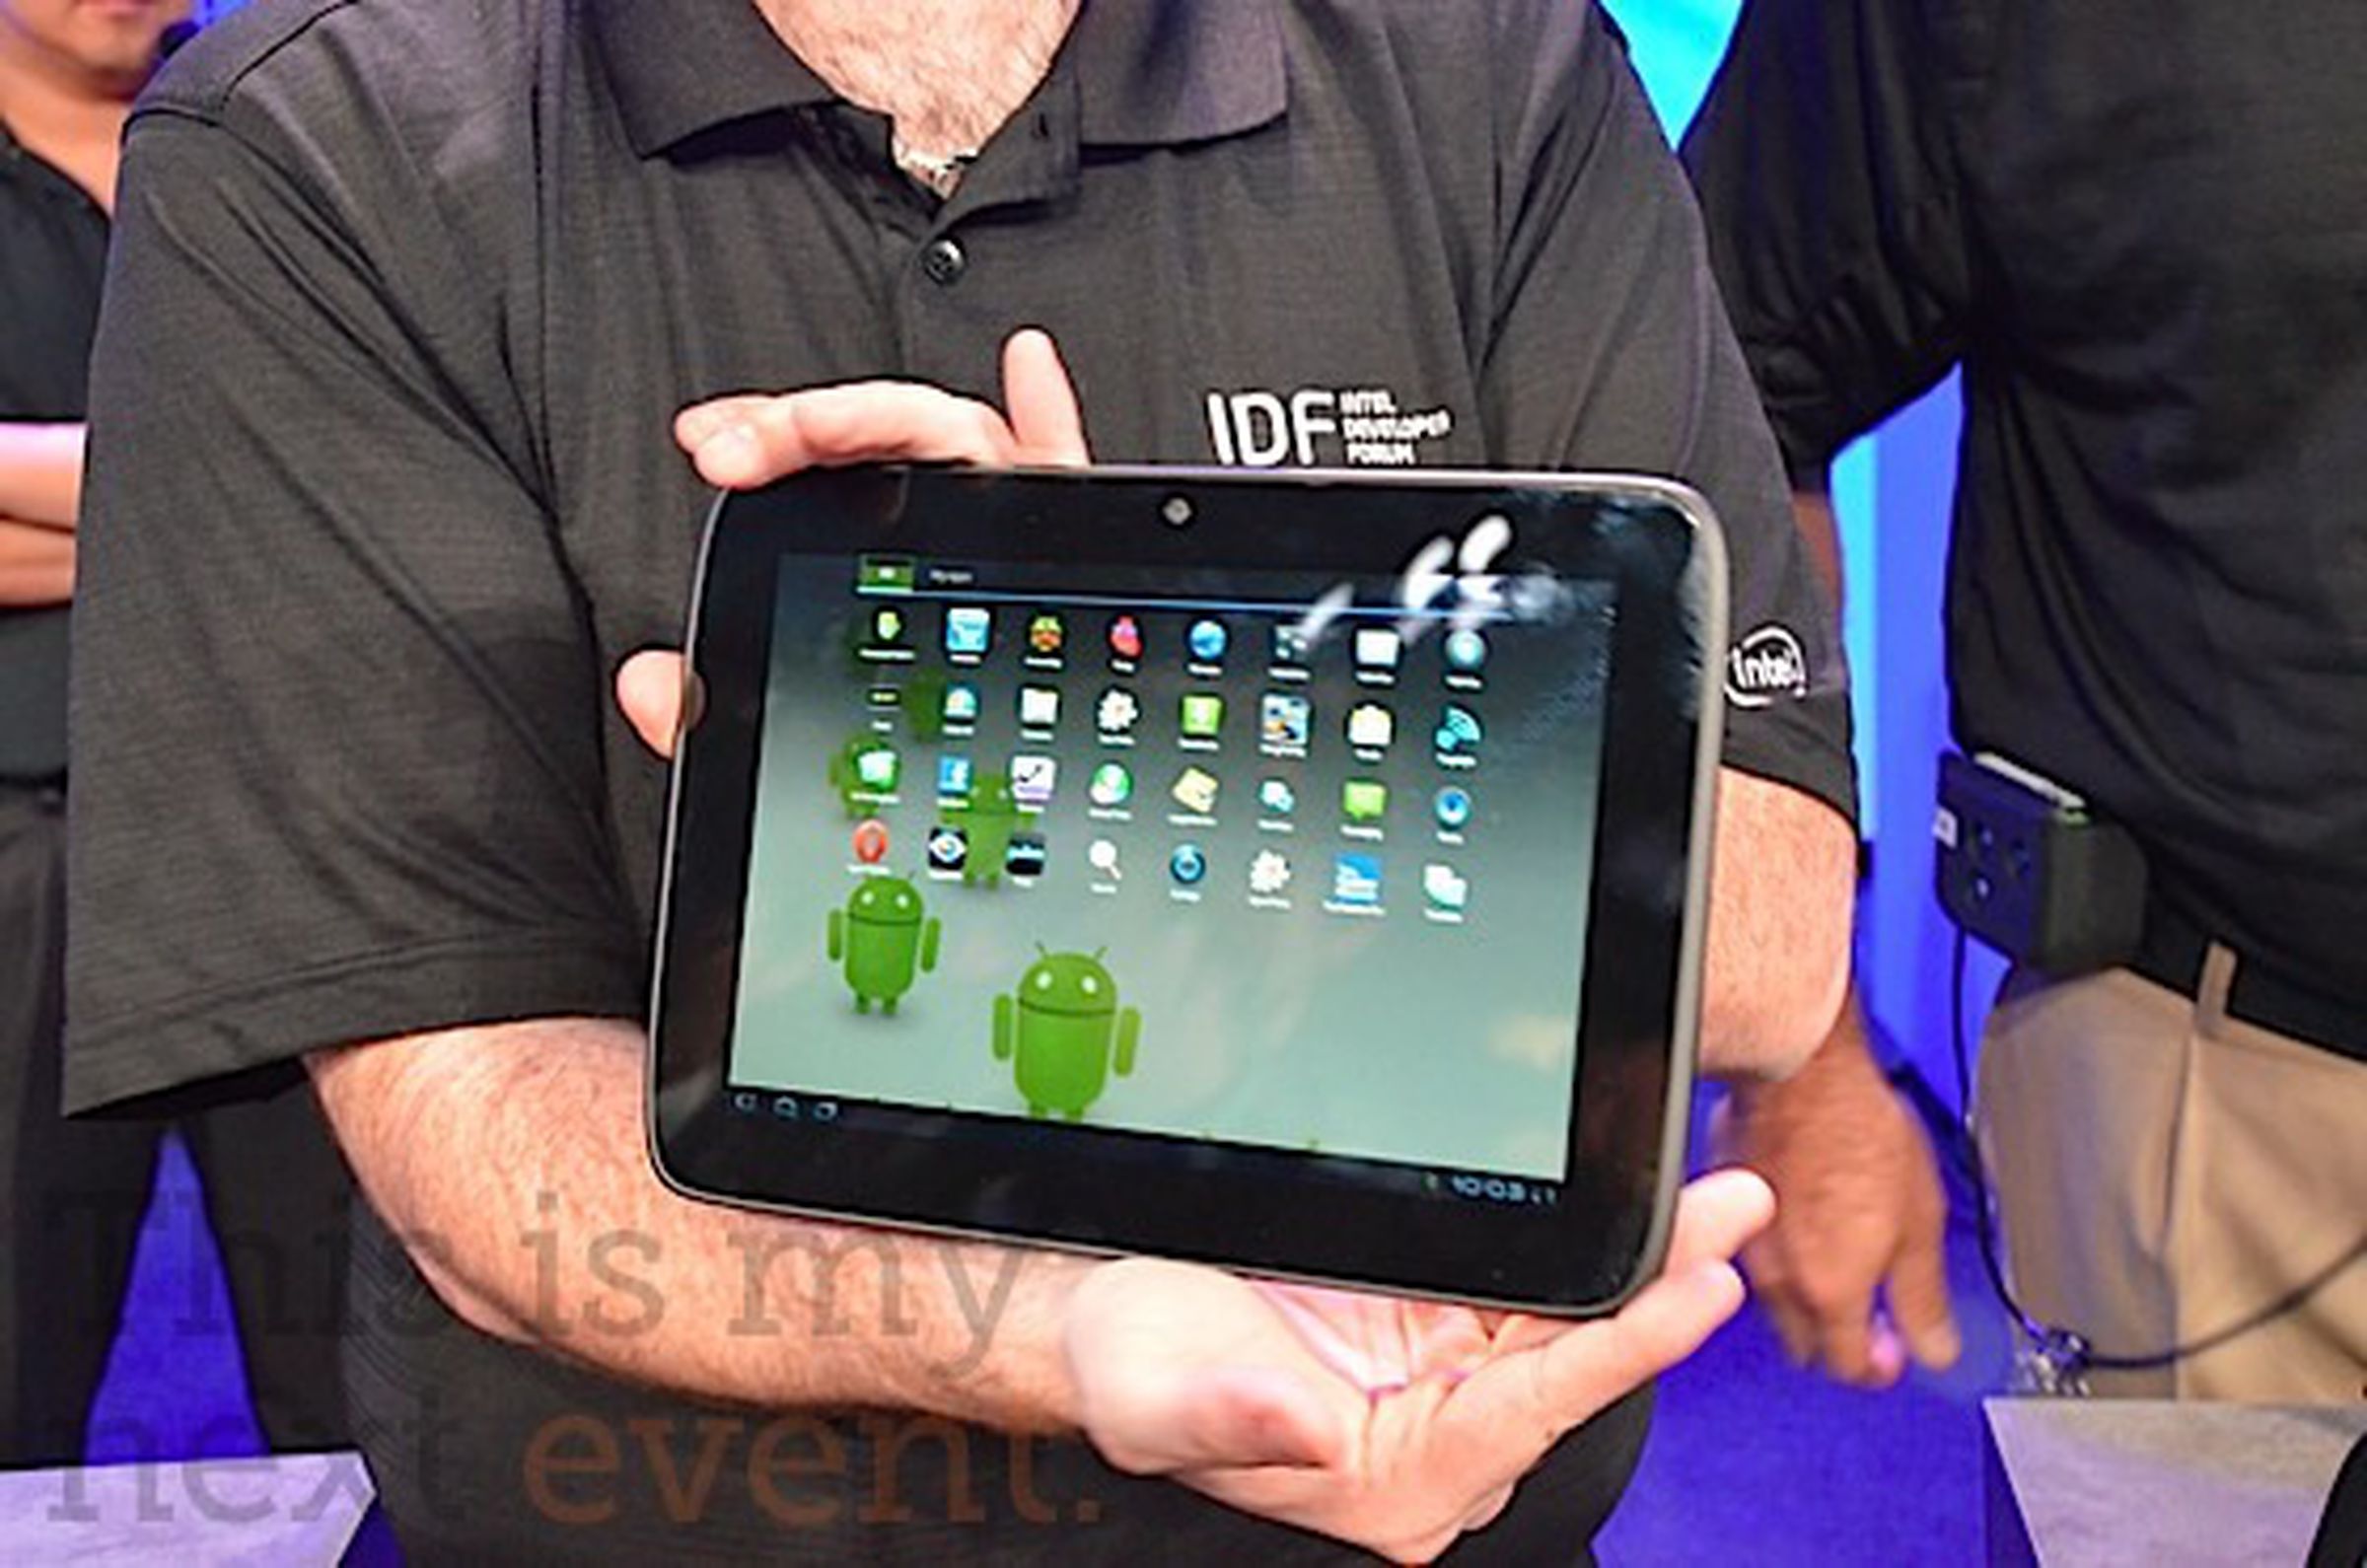 All future Android versions to be optimized for Intel as well as ARM; Medfield-based tablet and phone teased